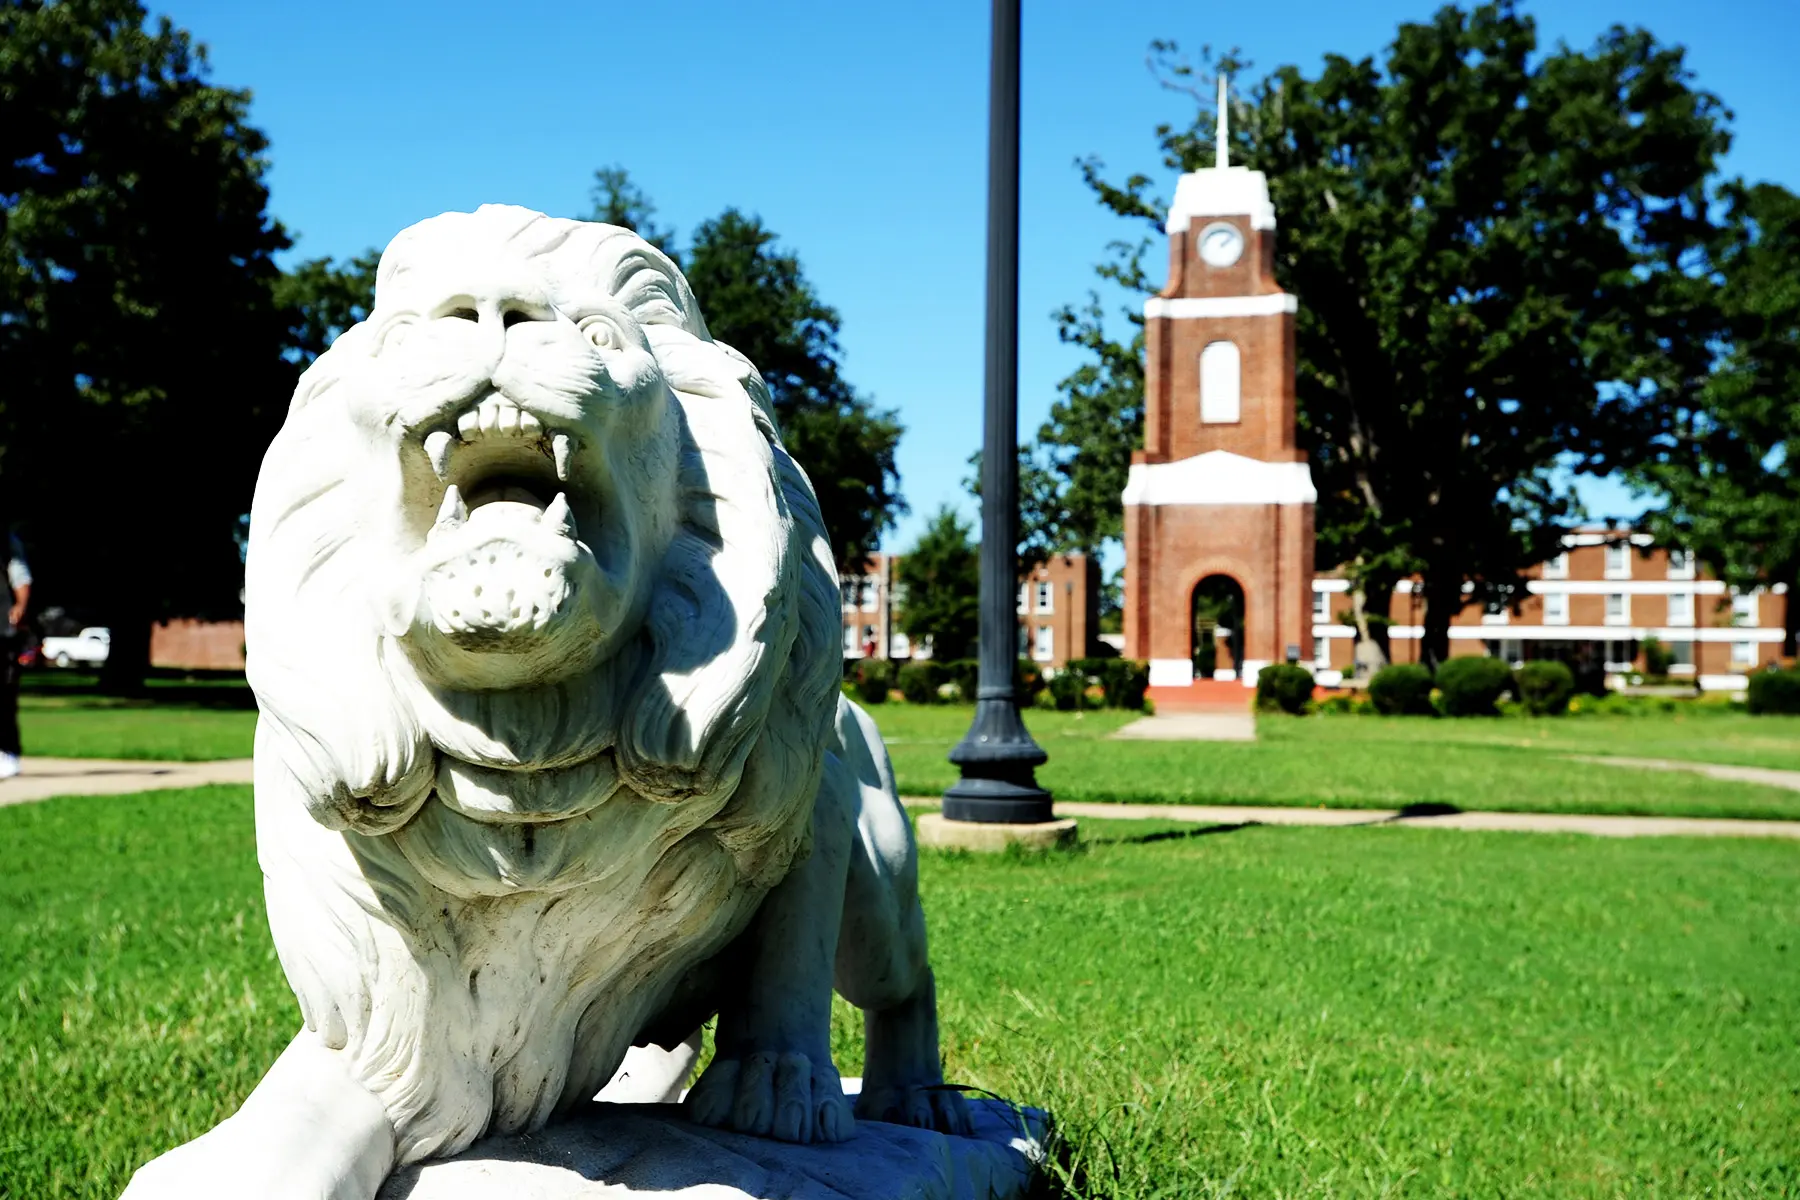 A lion statue on the grass in front of the clock tower